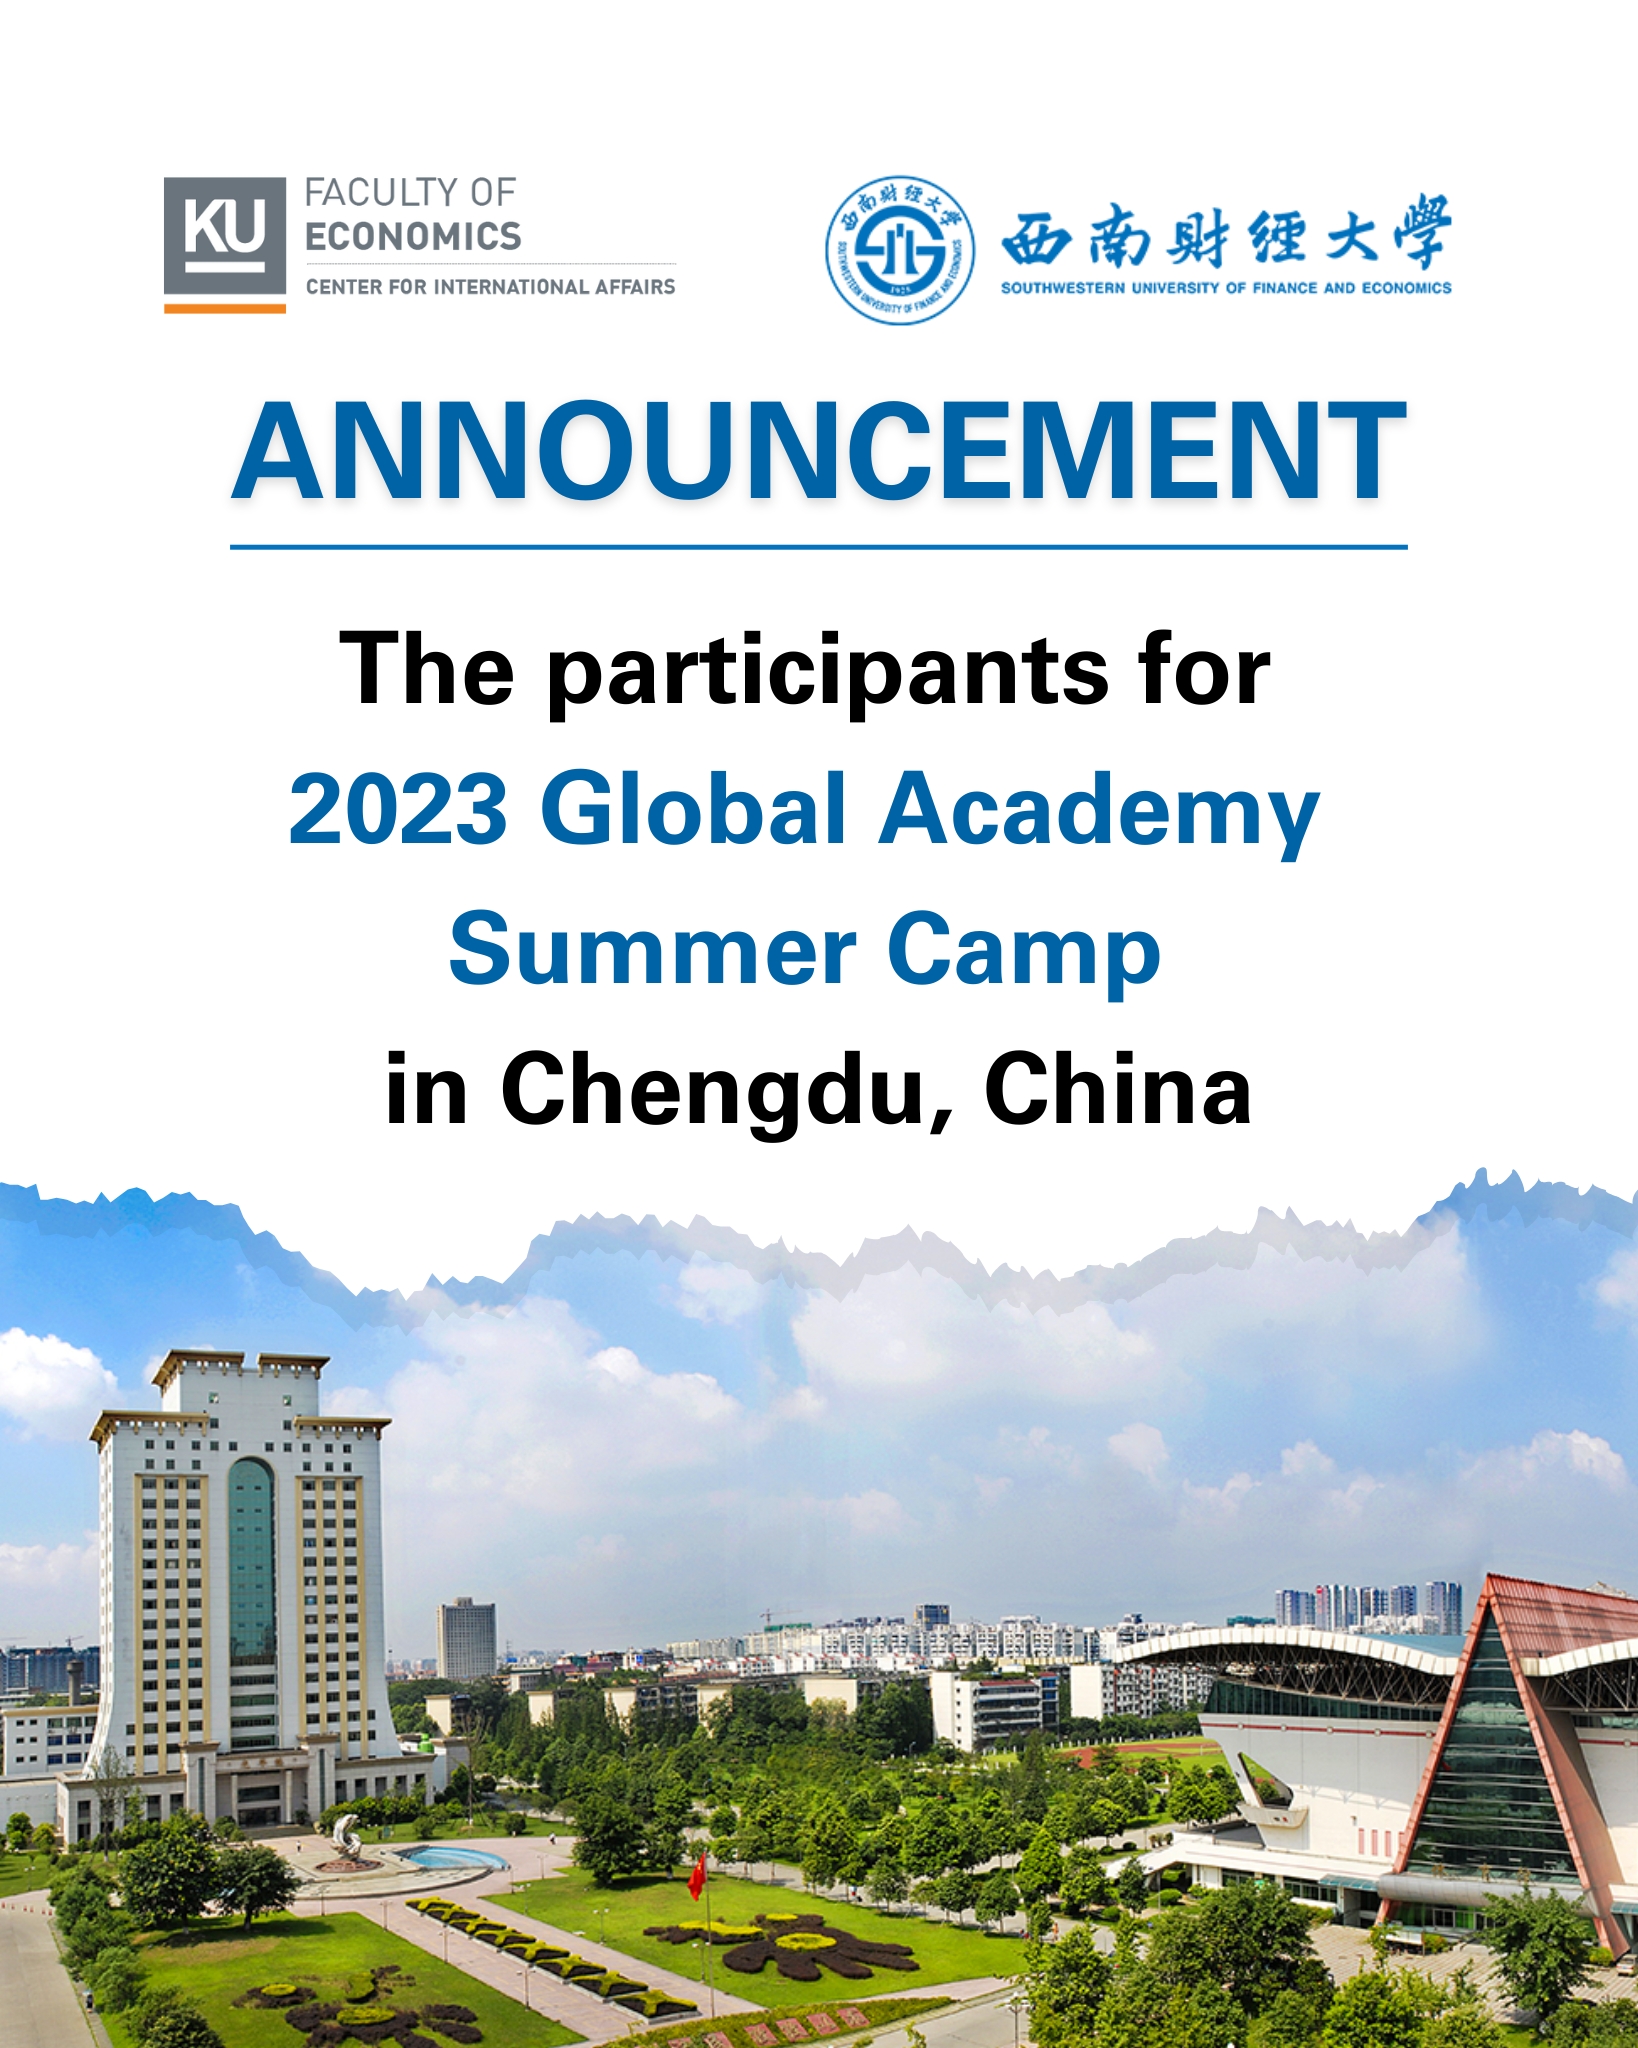 The participants for the the 2023 Global Academy Summer Camp in Chengdu, China